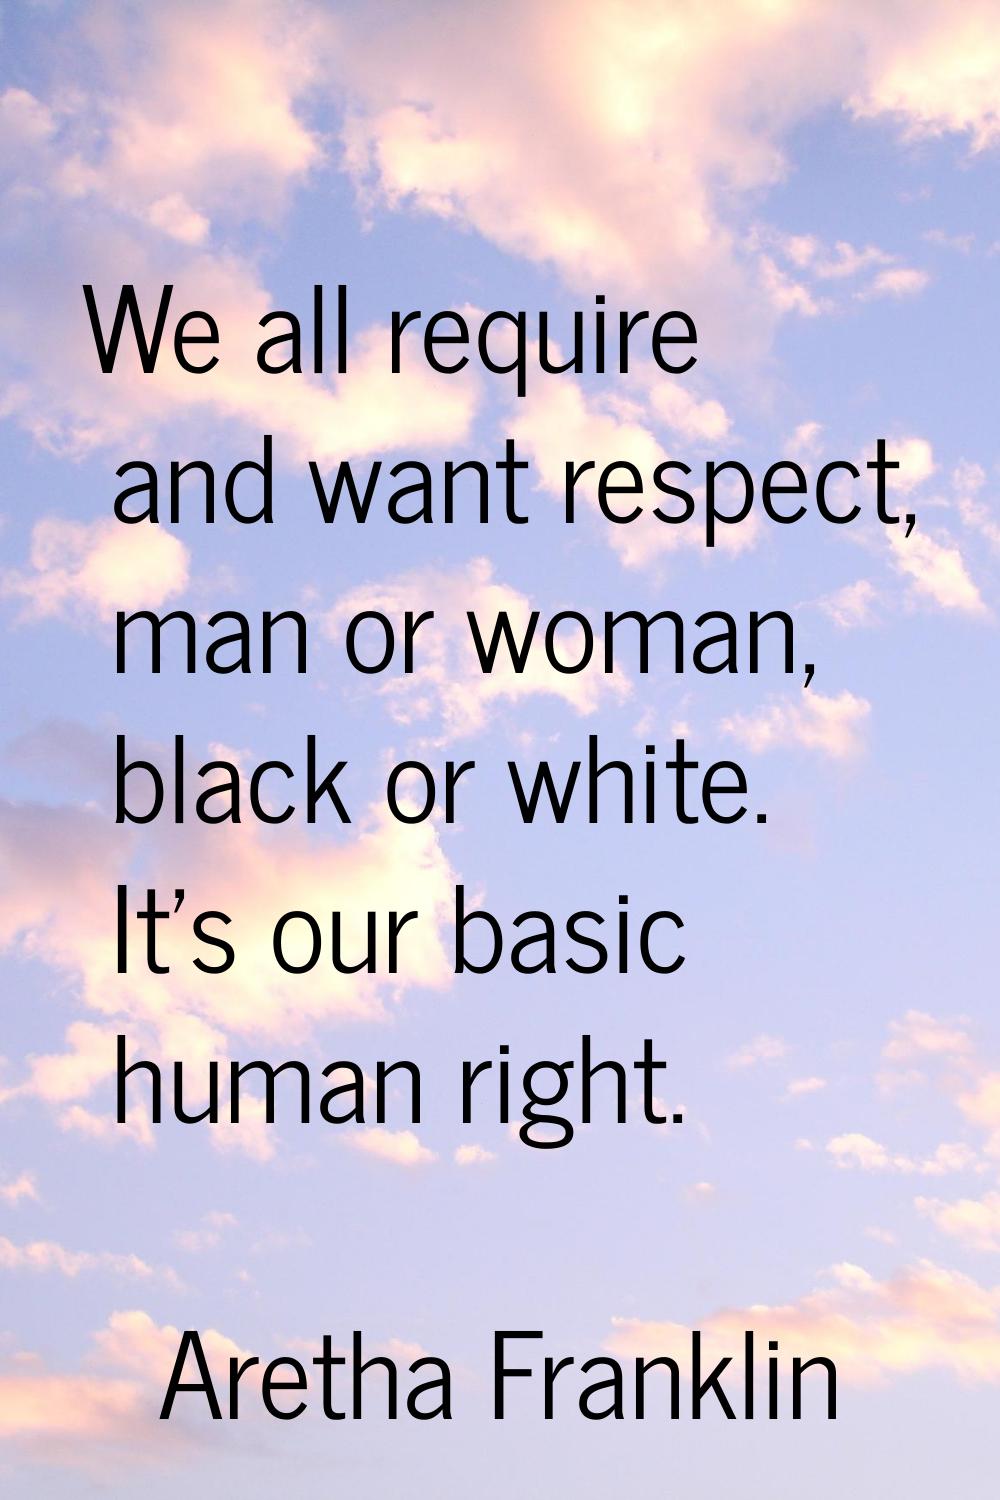 We all require and want respect, man or woman, black or white. It's our basic human right.